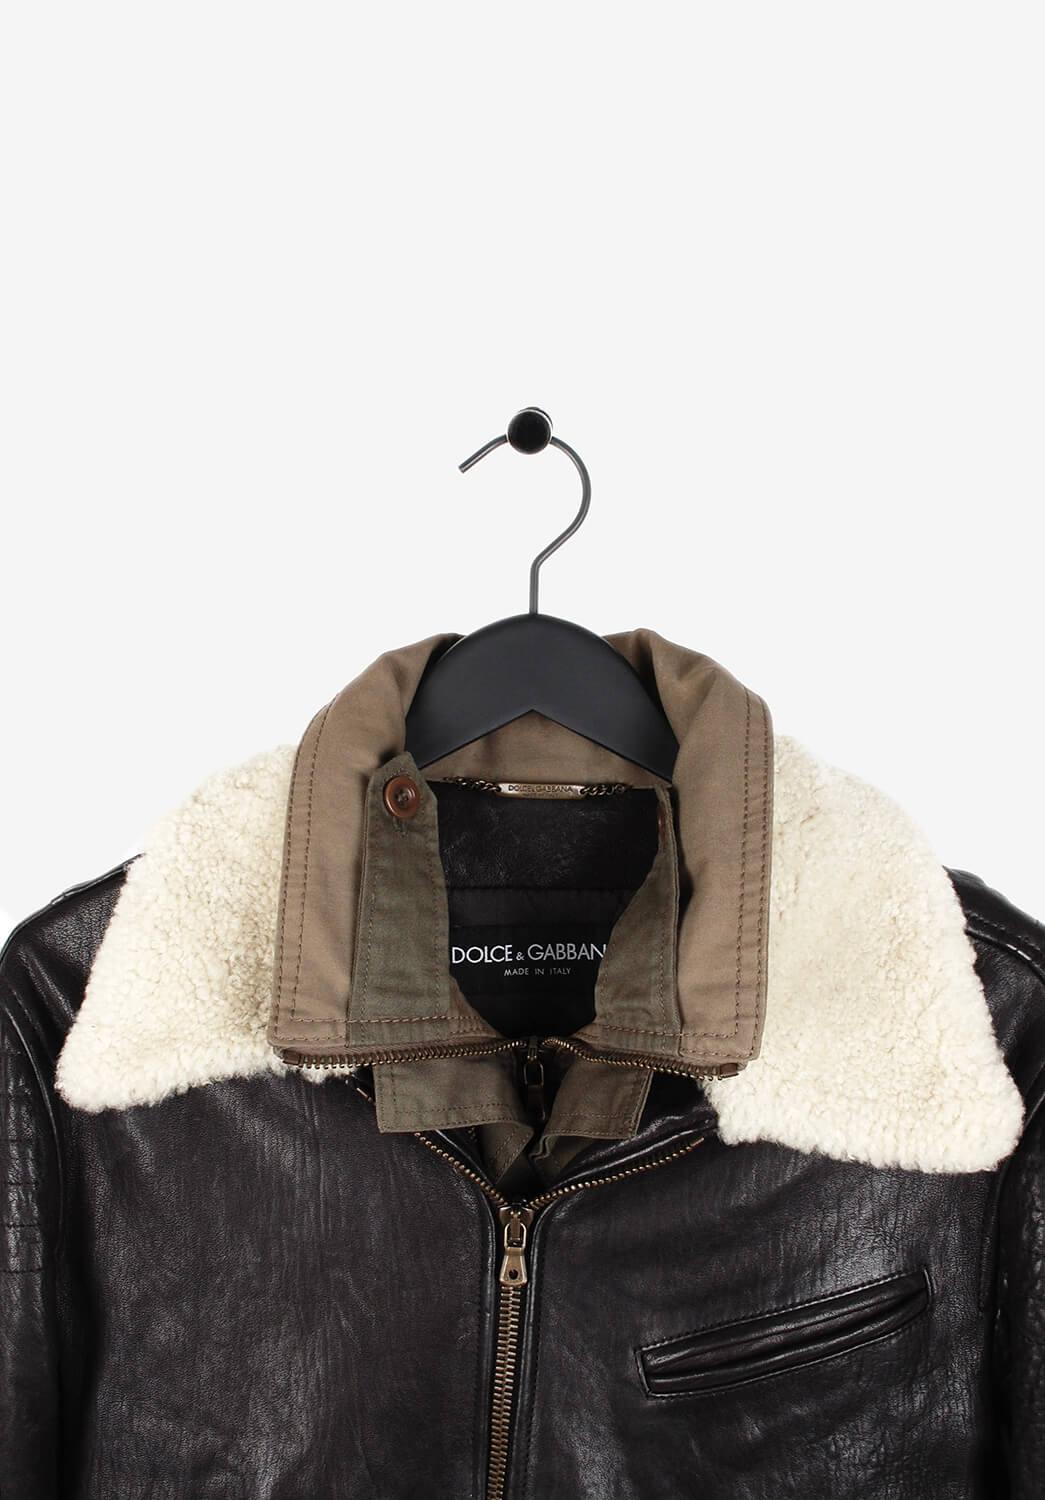 Item for sale is 100% genuine Dolce&Gabbana Leather Heavy Military Jacket
Color: Black
(An actual color may a bit vary due to individual computer screen interpretation)
Material: 90% lamb skin, 10% cotton
Tag size: 48IT (Medium)
This jacket is great